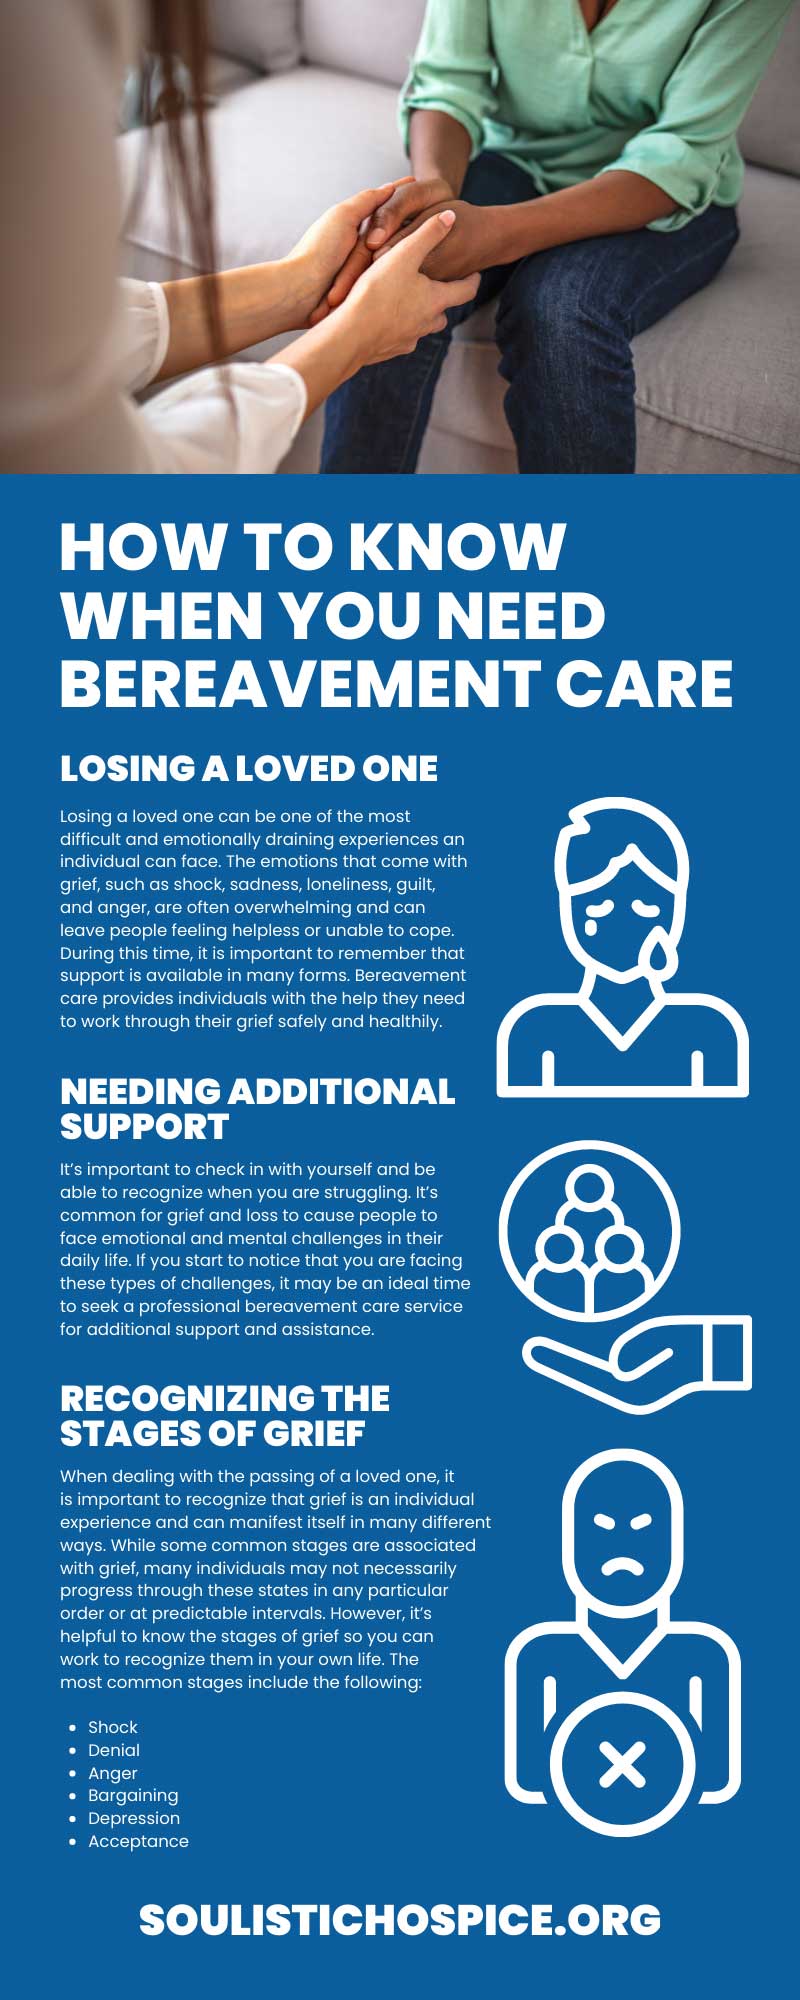 How To Know When You Need Bereavement Care